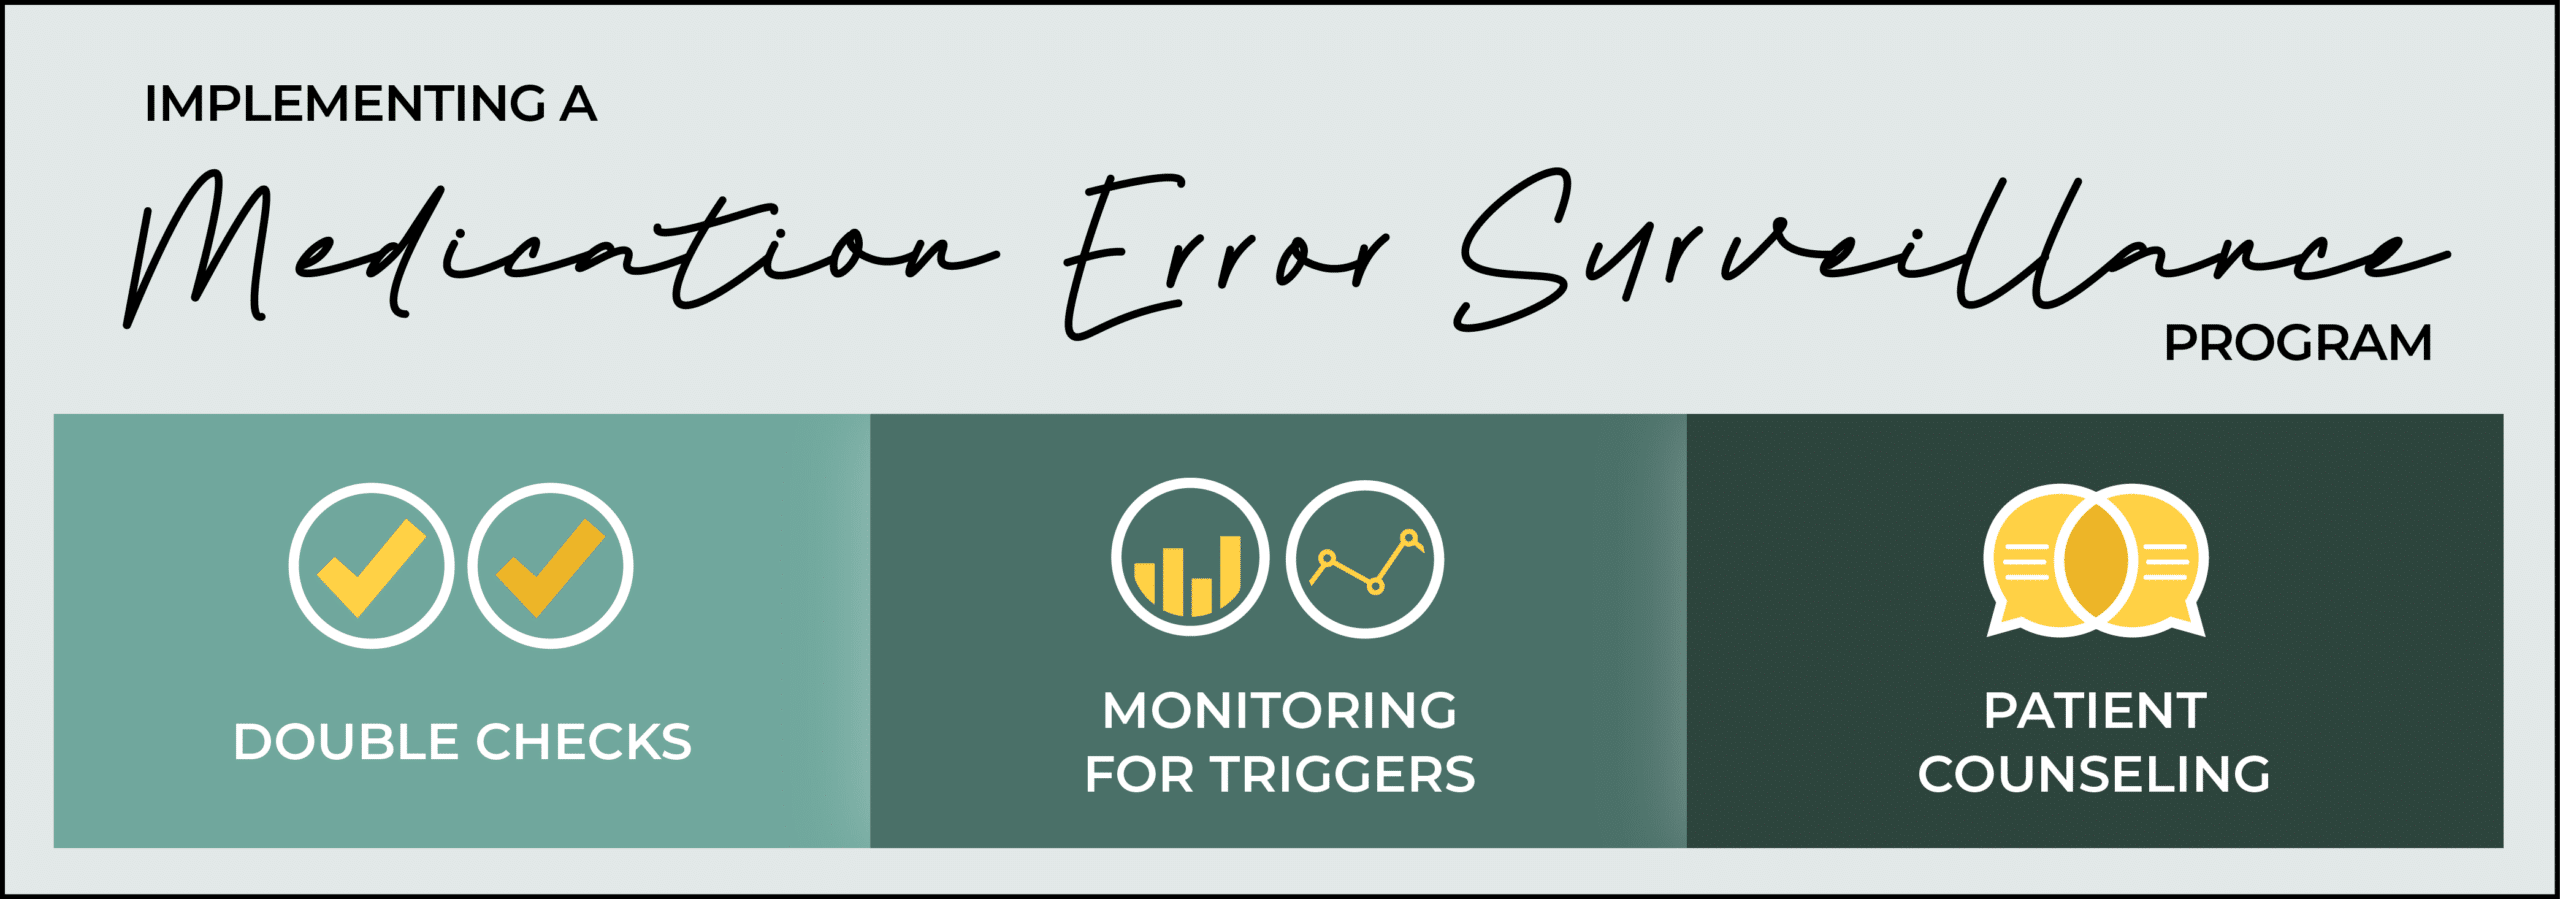 Implementing an MES Program: double checks, monitoring for triggers, and patient counseling